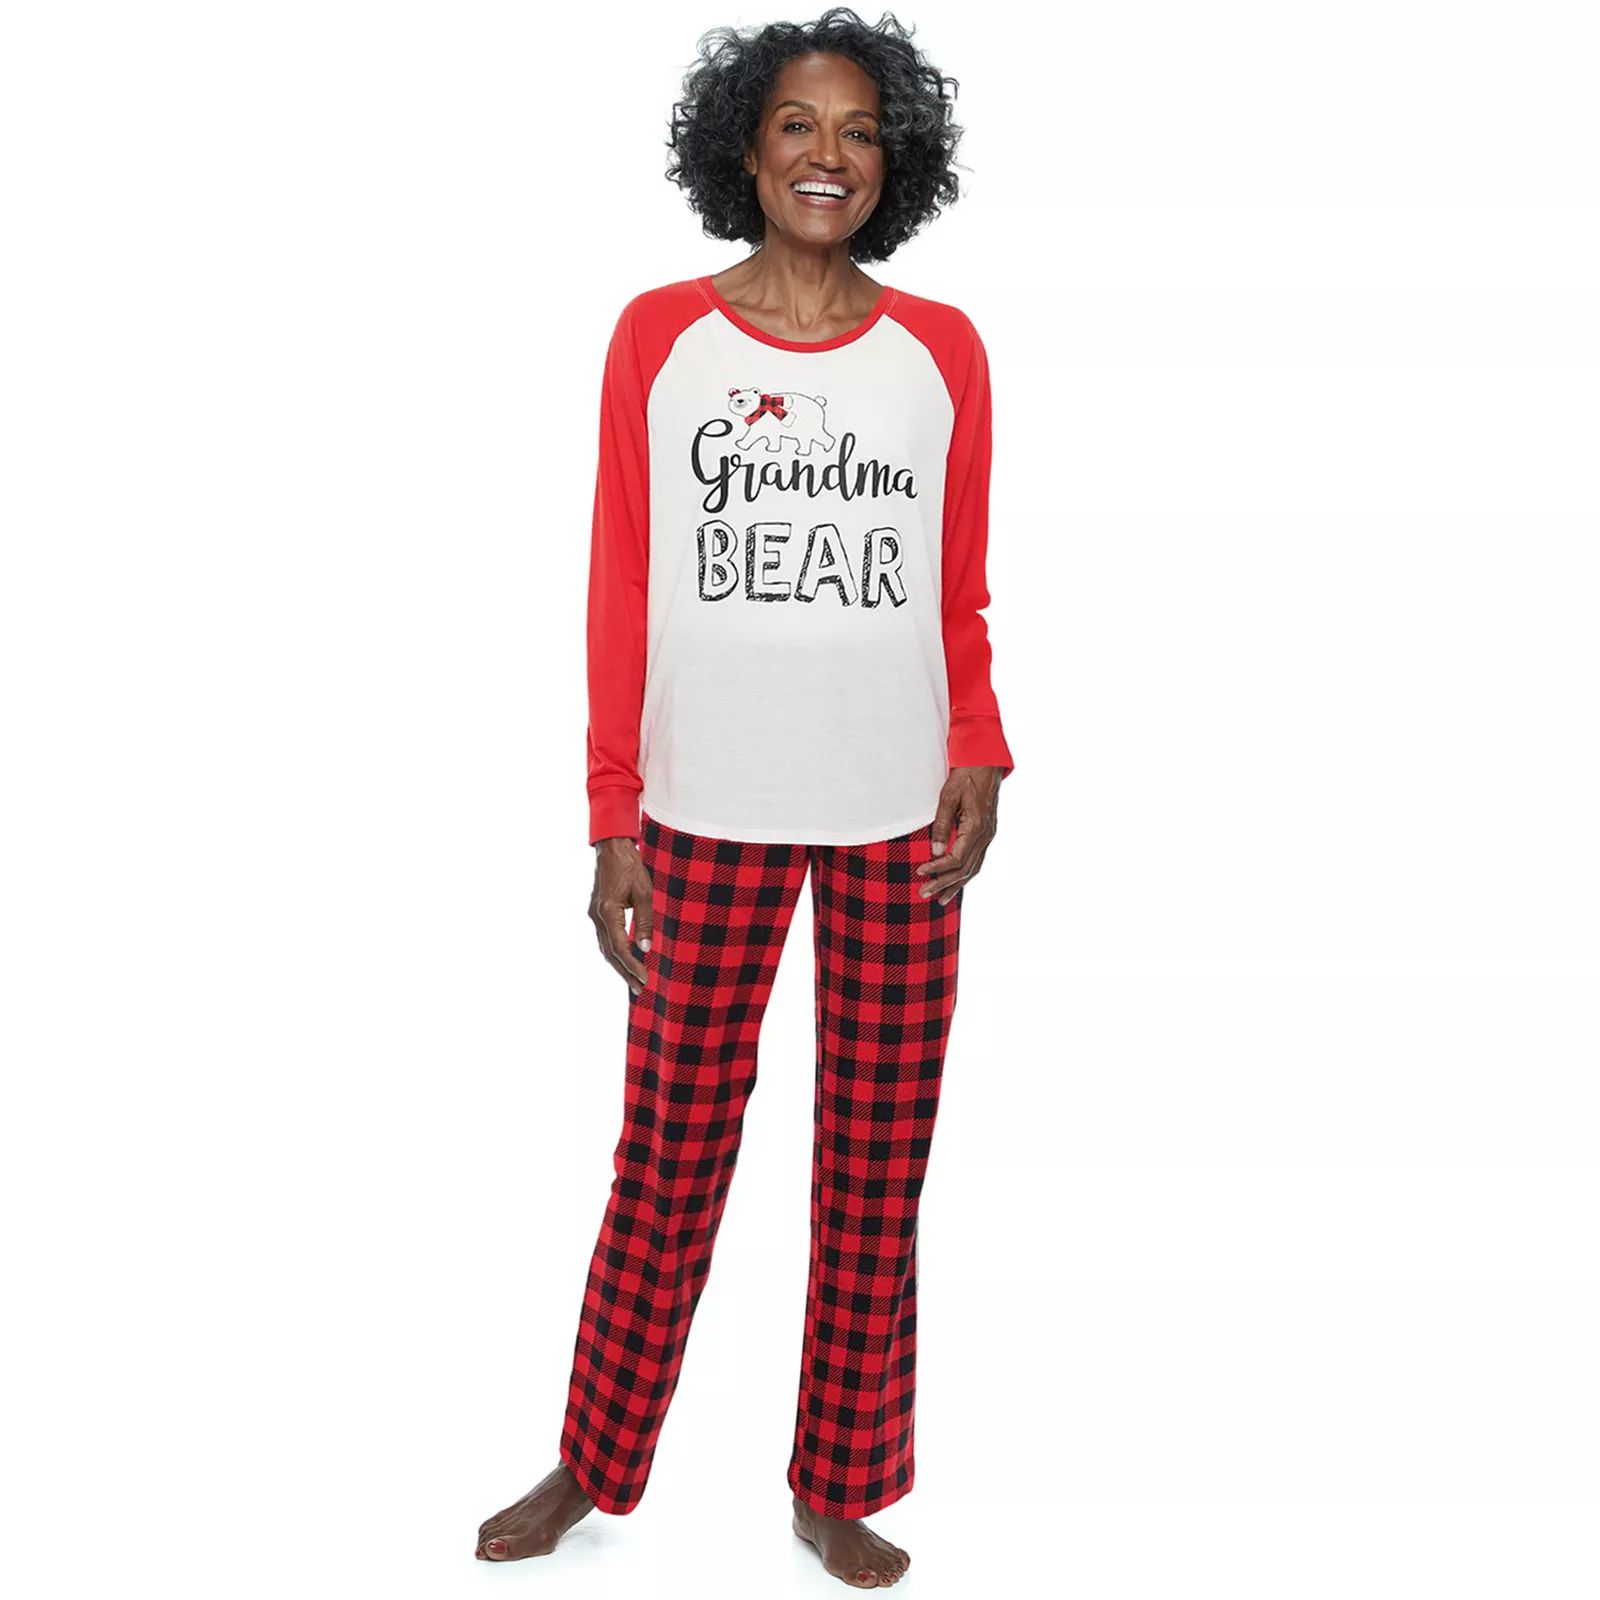 Women's Jammies For Your Families Cool Bear Top & Pants Pajama Set by Cuddl Duds, Size: XS, Brt Red | Kohl's